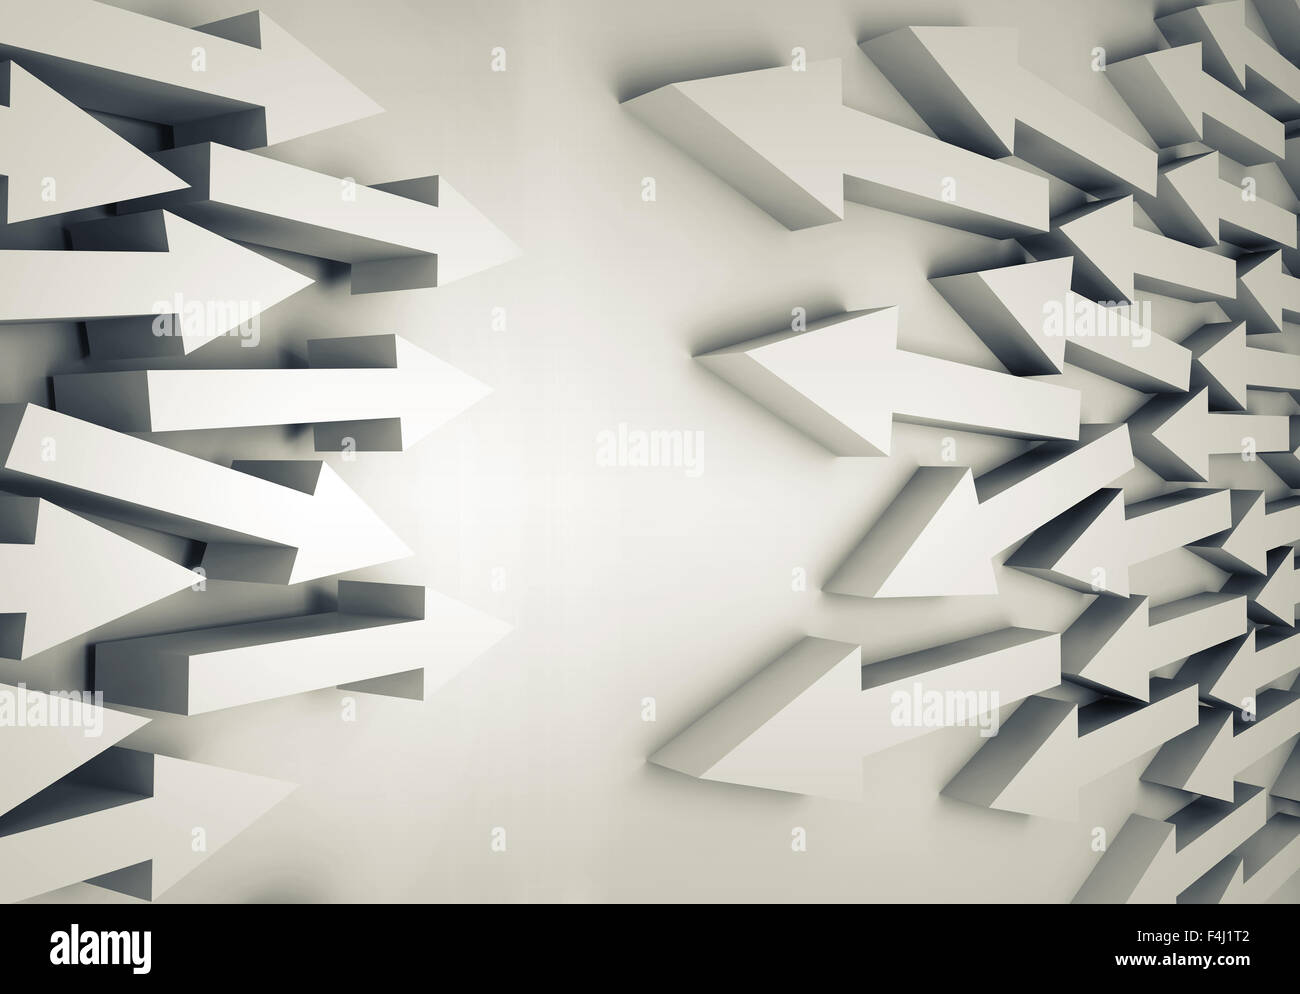 Abstract 3d illustration with groups of white arrows going towards each other Stock Photo